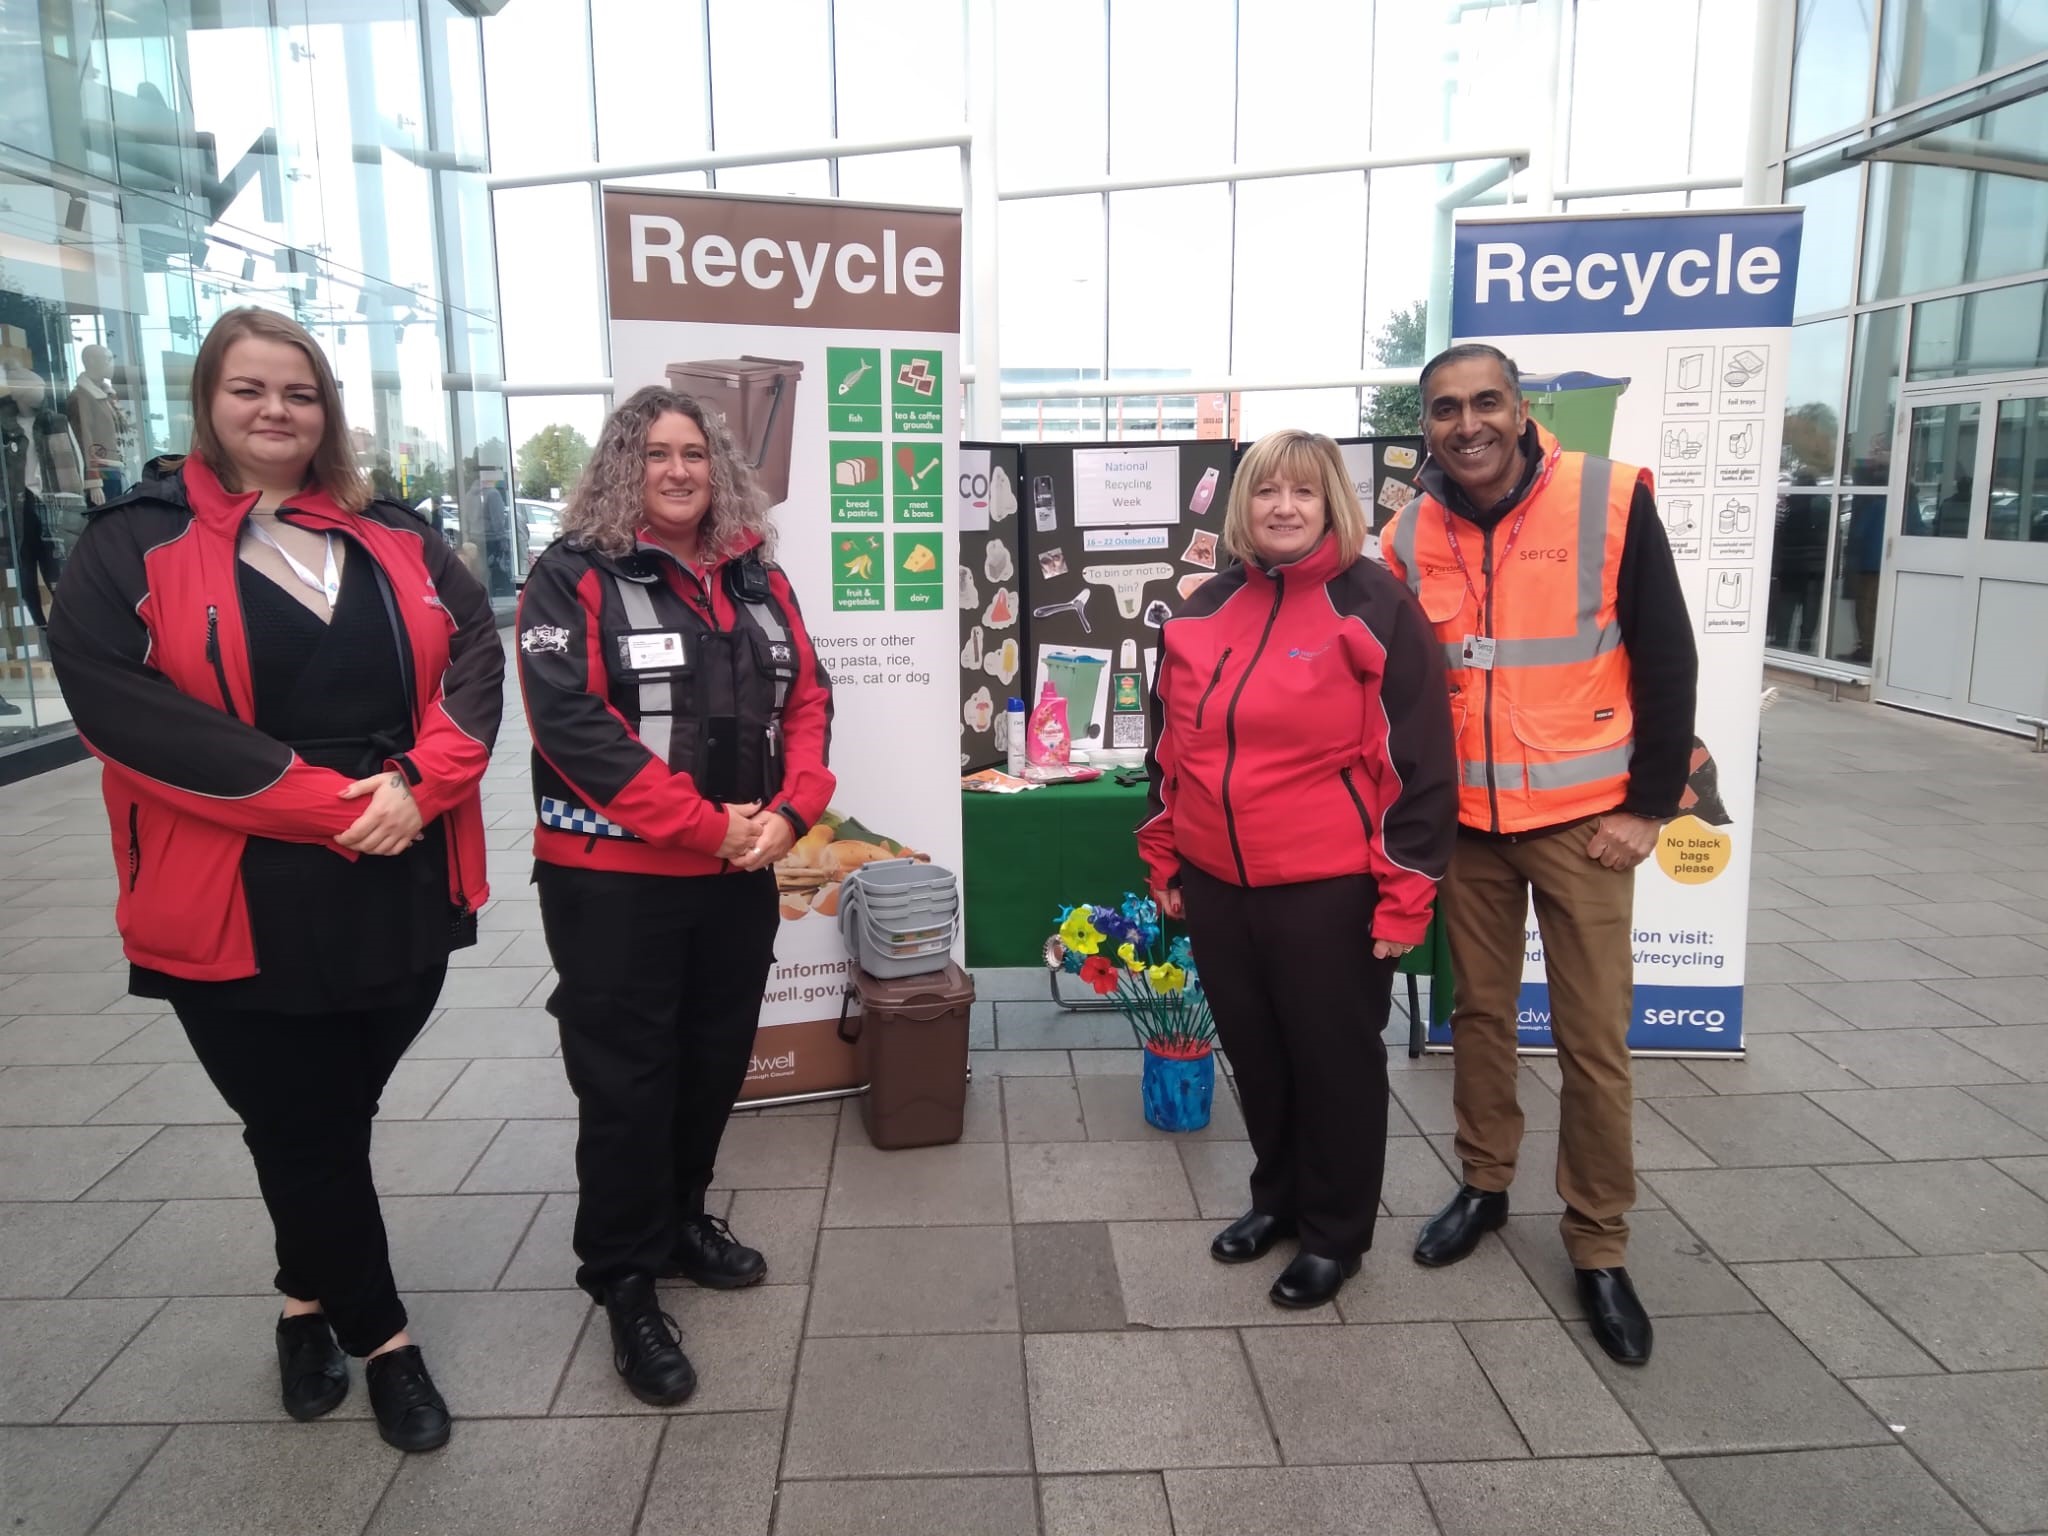 The BID team out promoting “Recycling Week